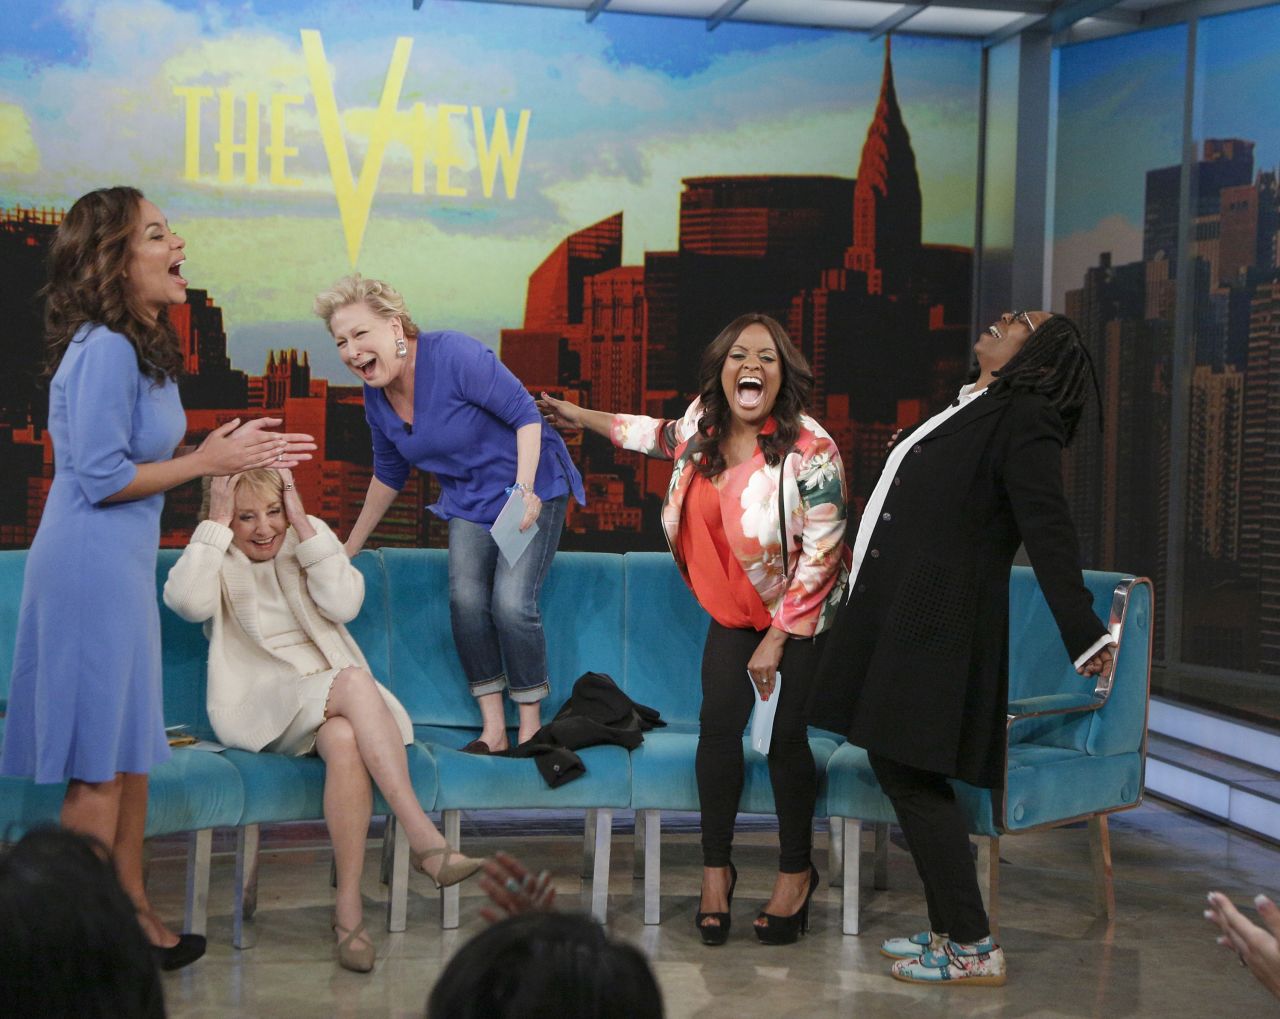 Hosts of "The View" laugh it up during an episode in 2014. From left are guest co-host Sunny Hostin, Walters, guest Bette Midler, Sherri Shepherd and Whoopi Goldberg.